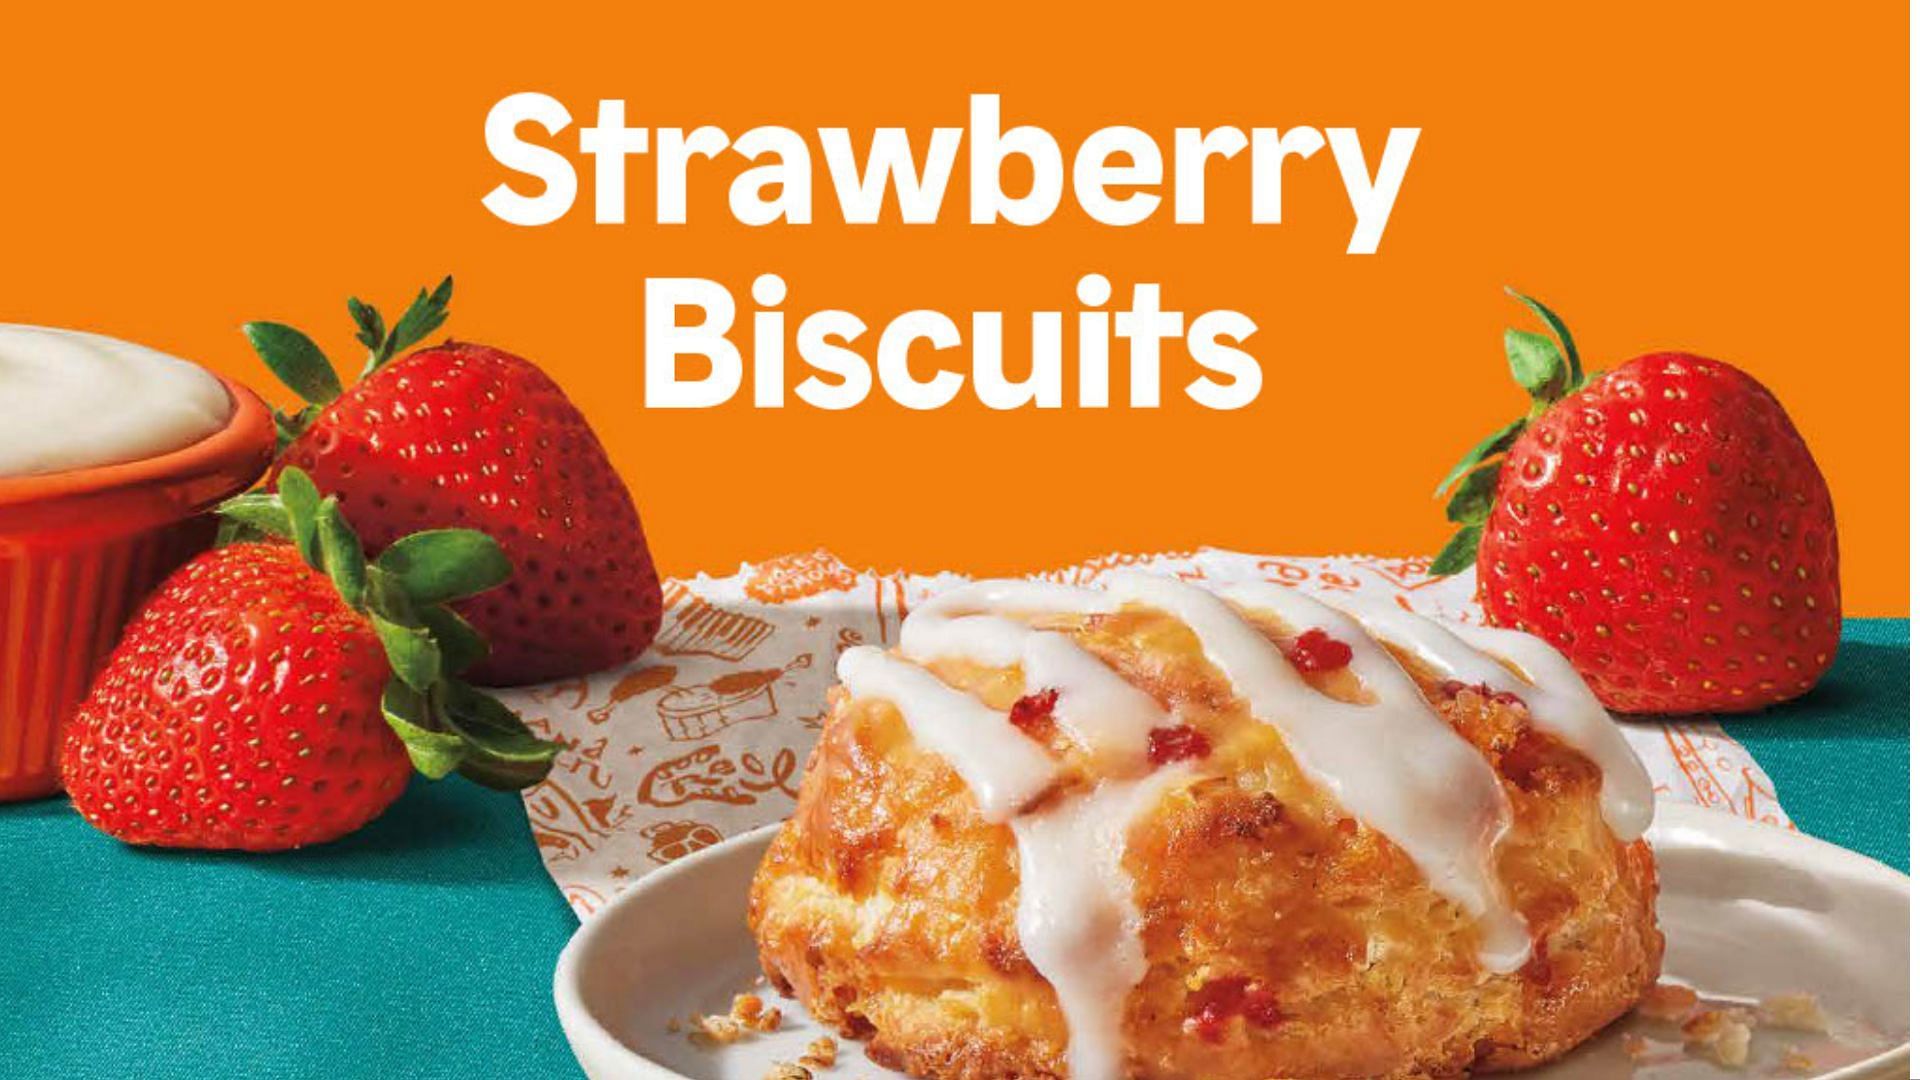 the Strawberry Biscuits will be available at all participating stores starting March 27 (Image via Popeyes)